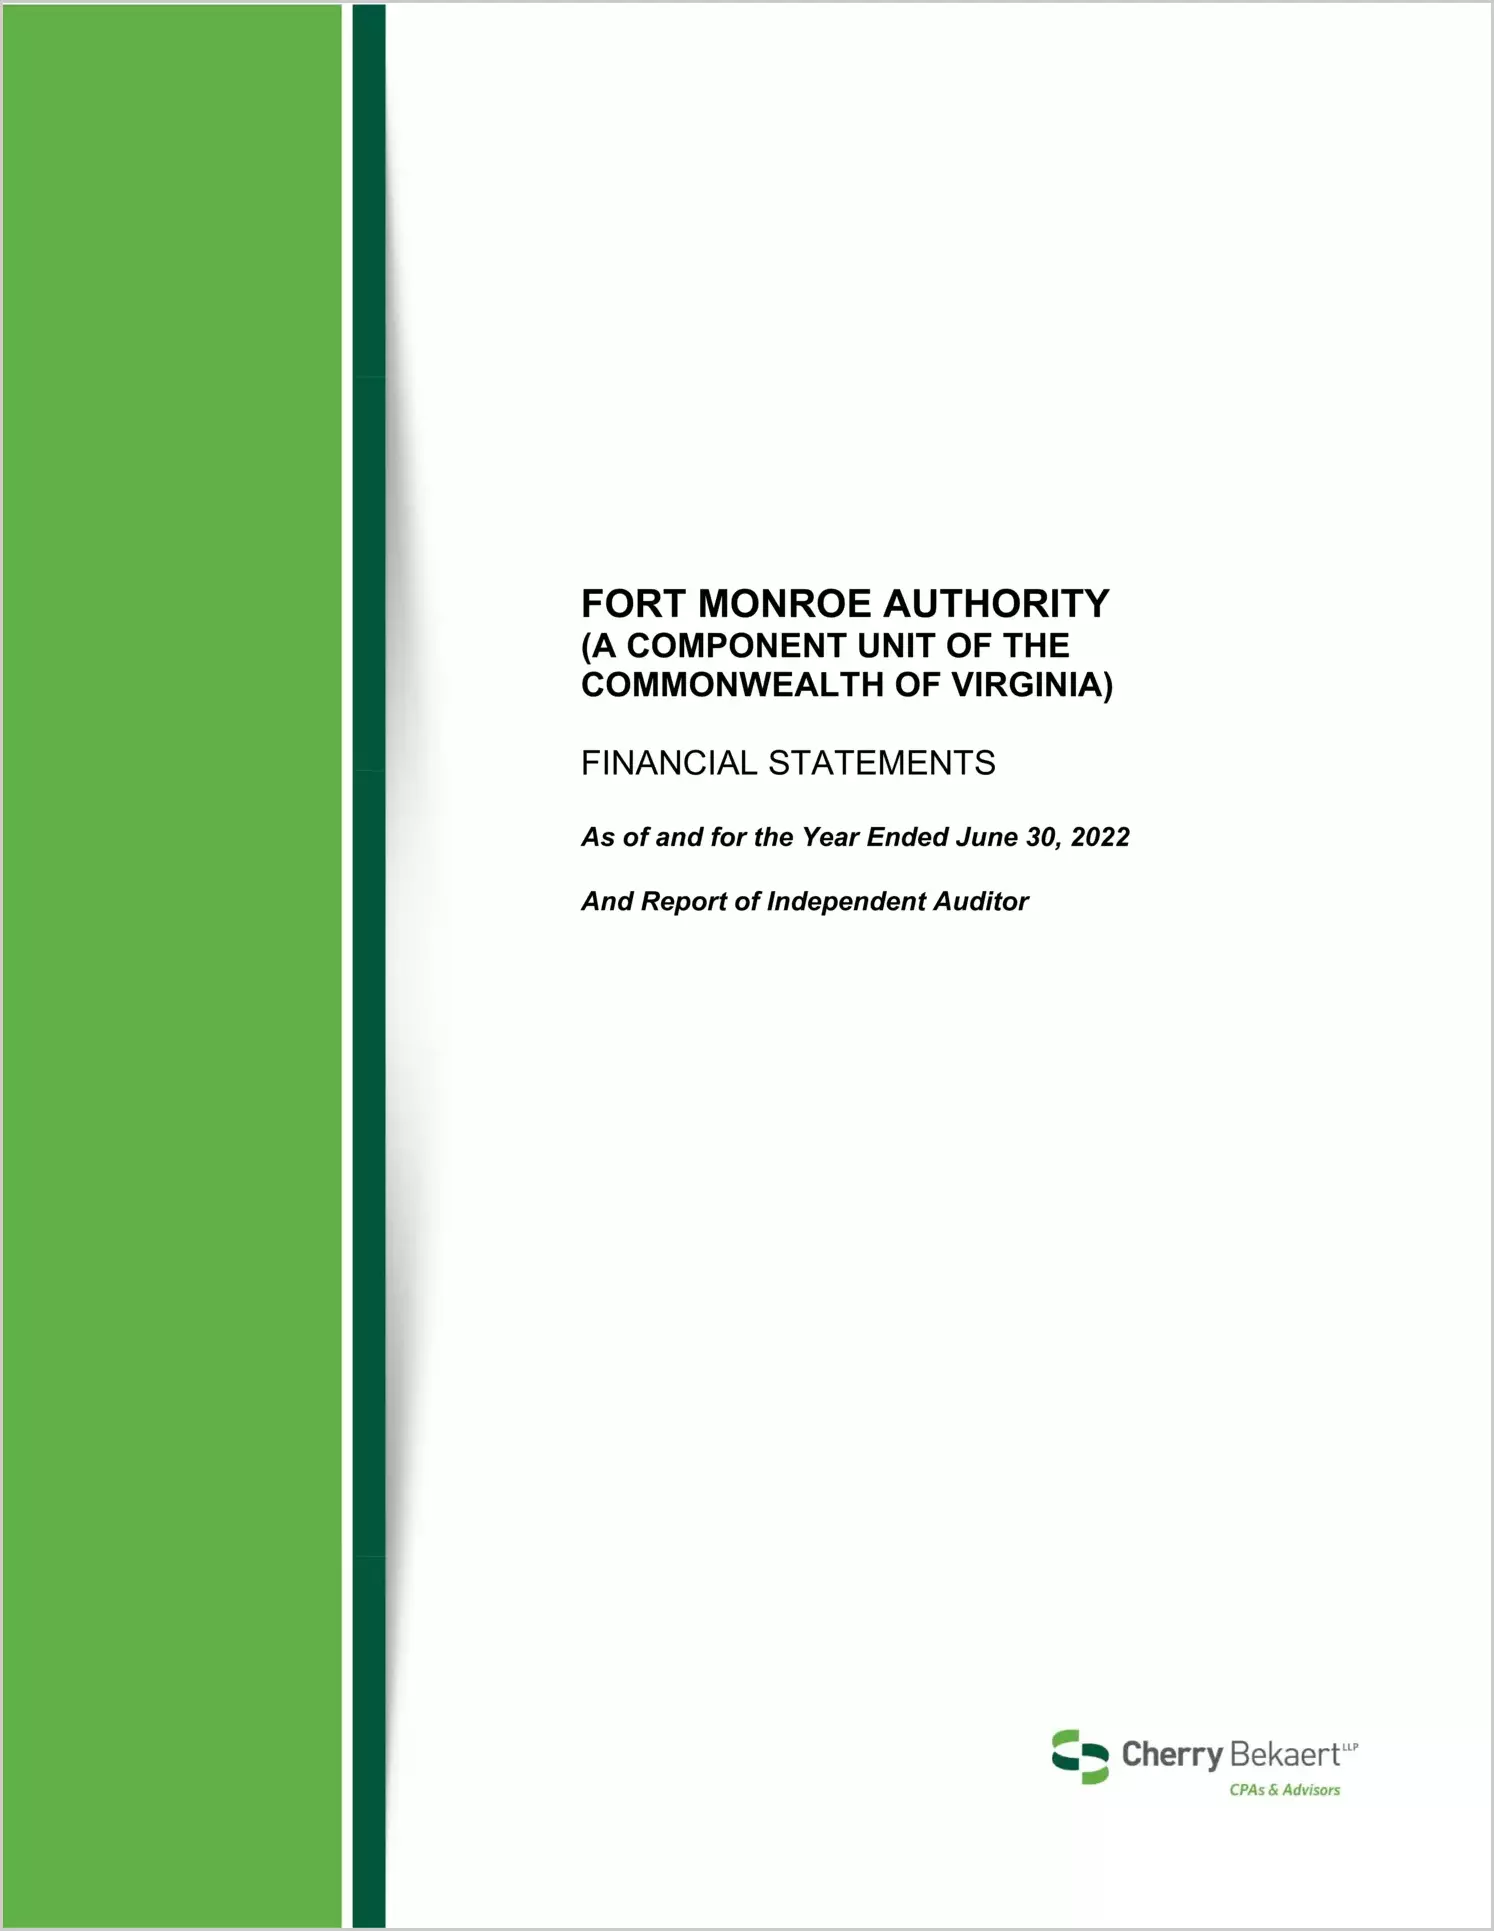 Fort Monroe Authority for the year ended June 30, 2022